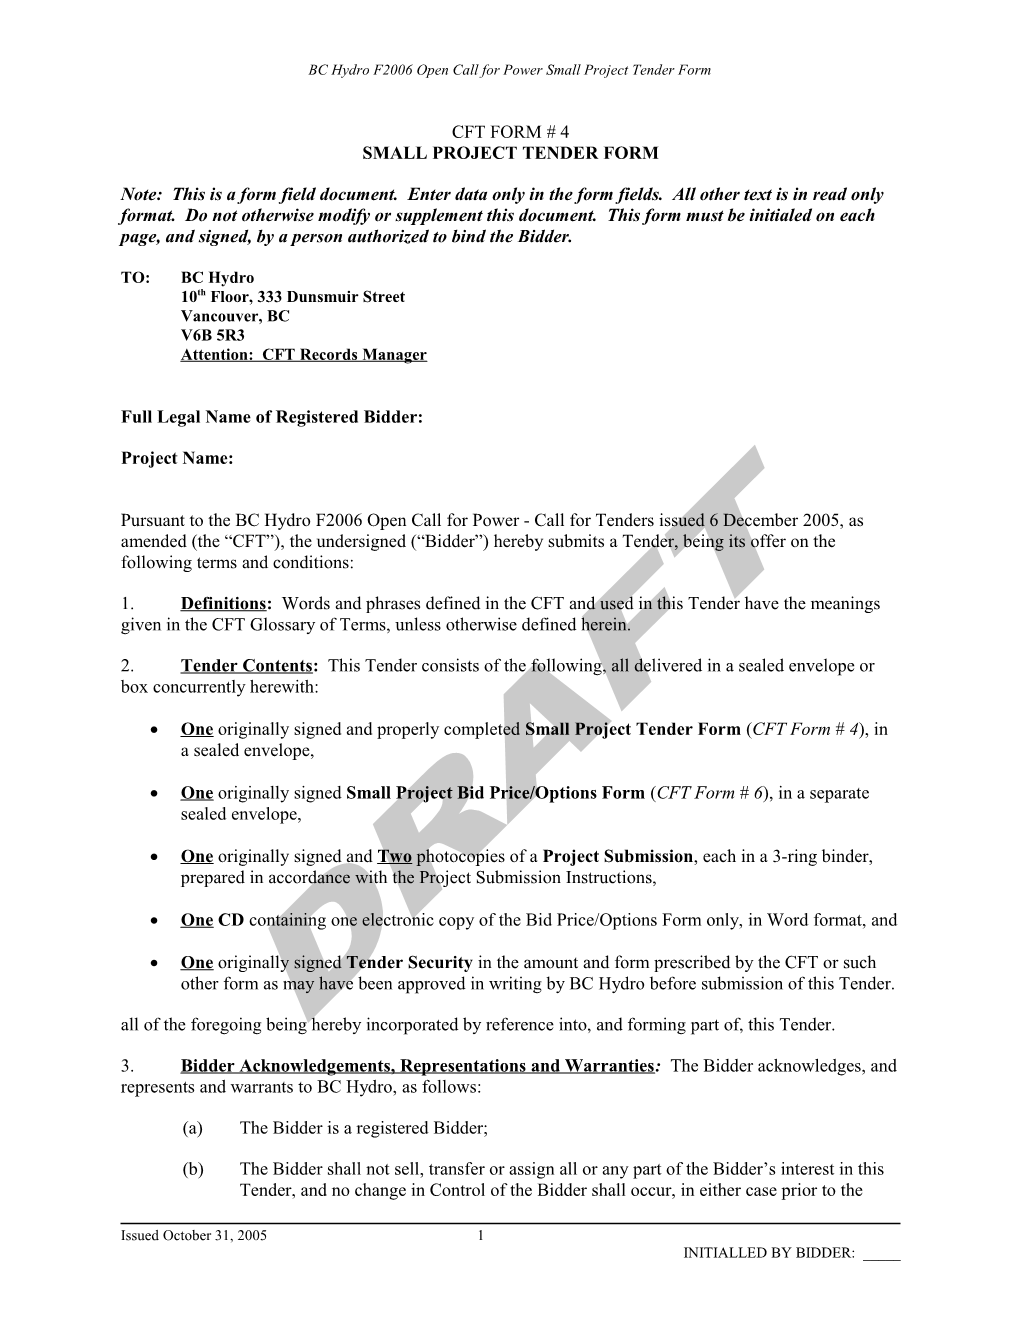 Small Project Tender Form